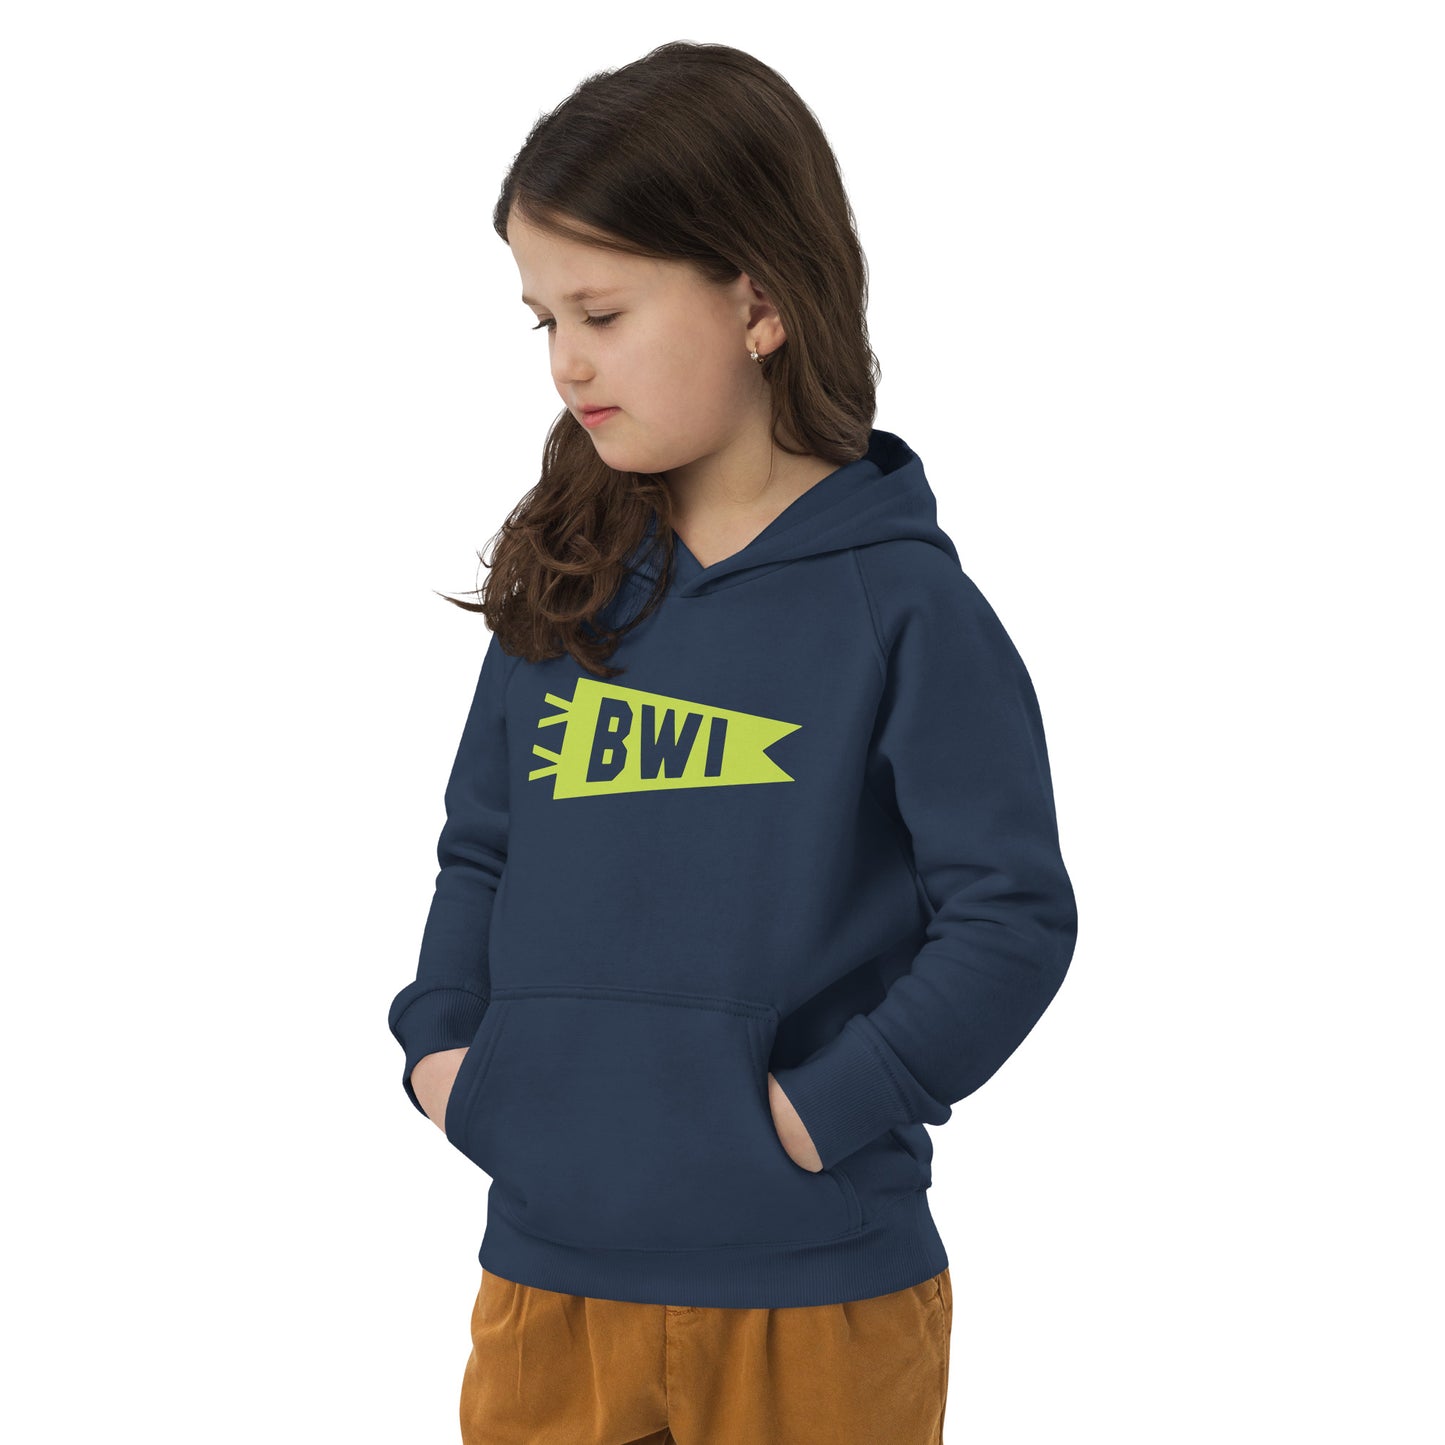 Kid's Sustainable Hoodie - Green Graphic • BWI Baltimore • YHM Designs - Image 05